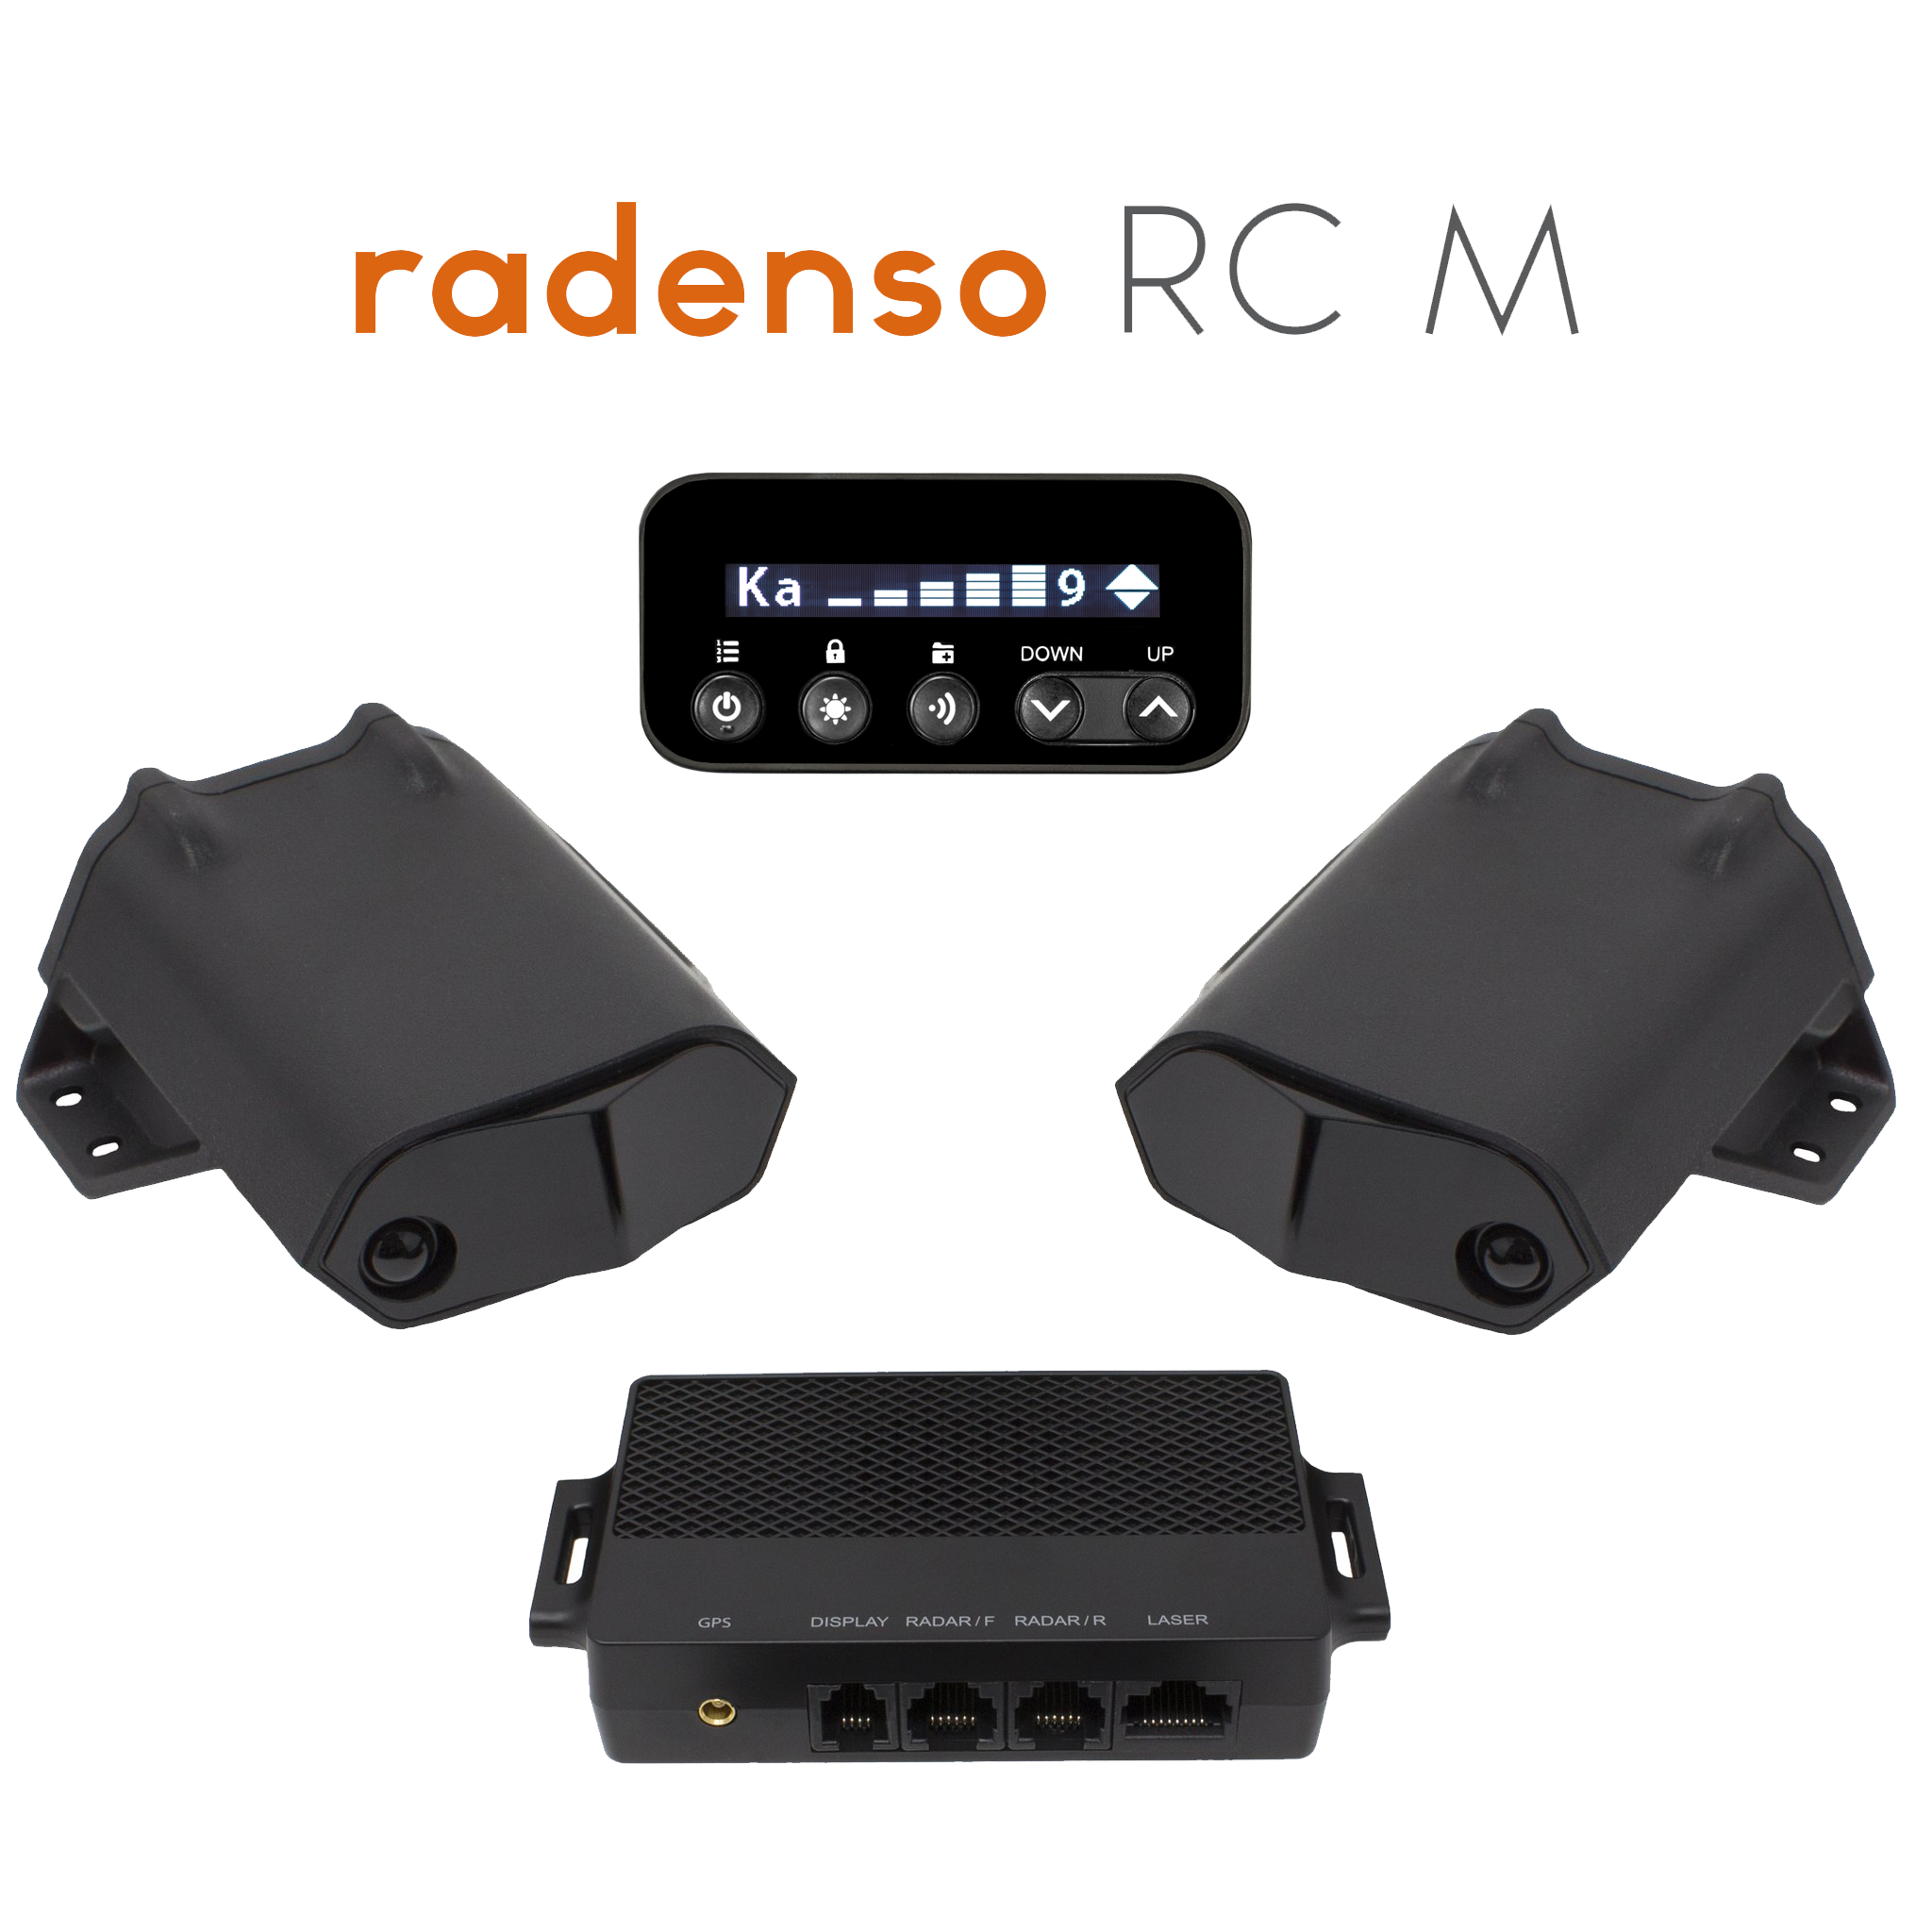 Radenso Ultimate system showing all of the equipment included